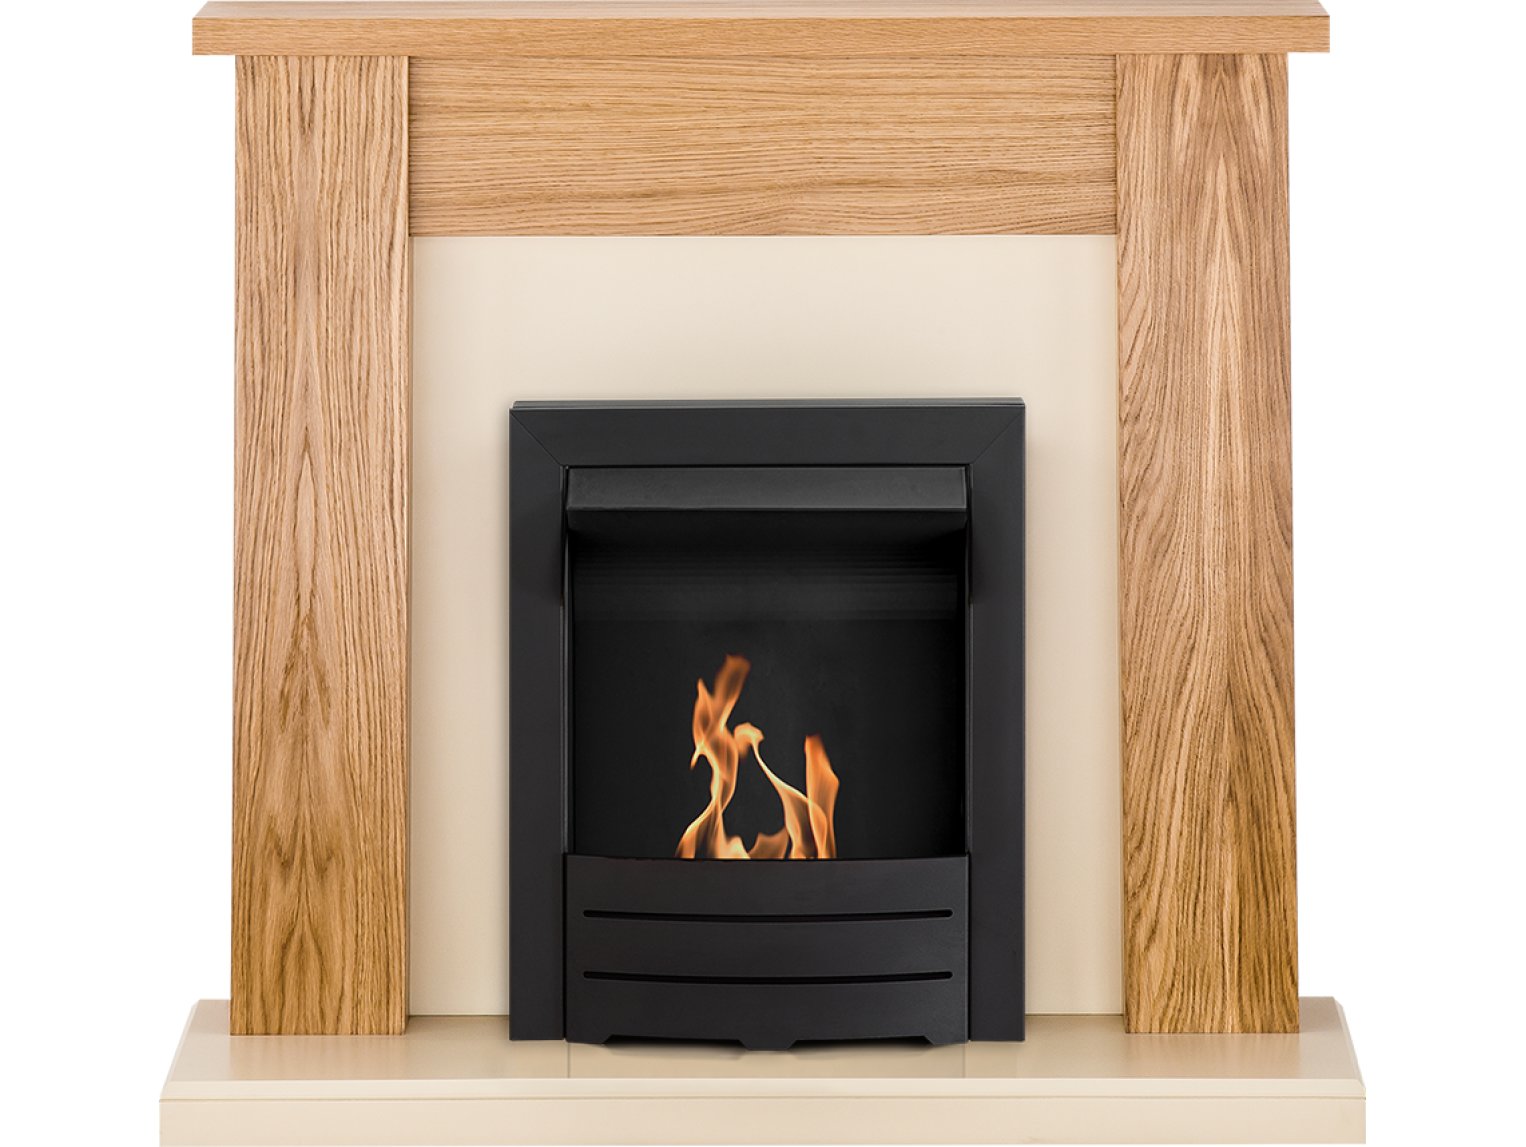 Adam New England Fireplace Suite in Oak with Colorado Bio Ethanol Fire in Black, 48 Inch